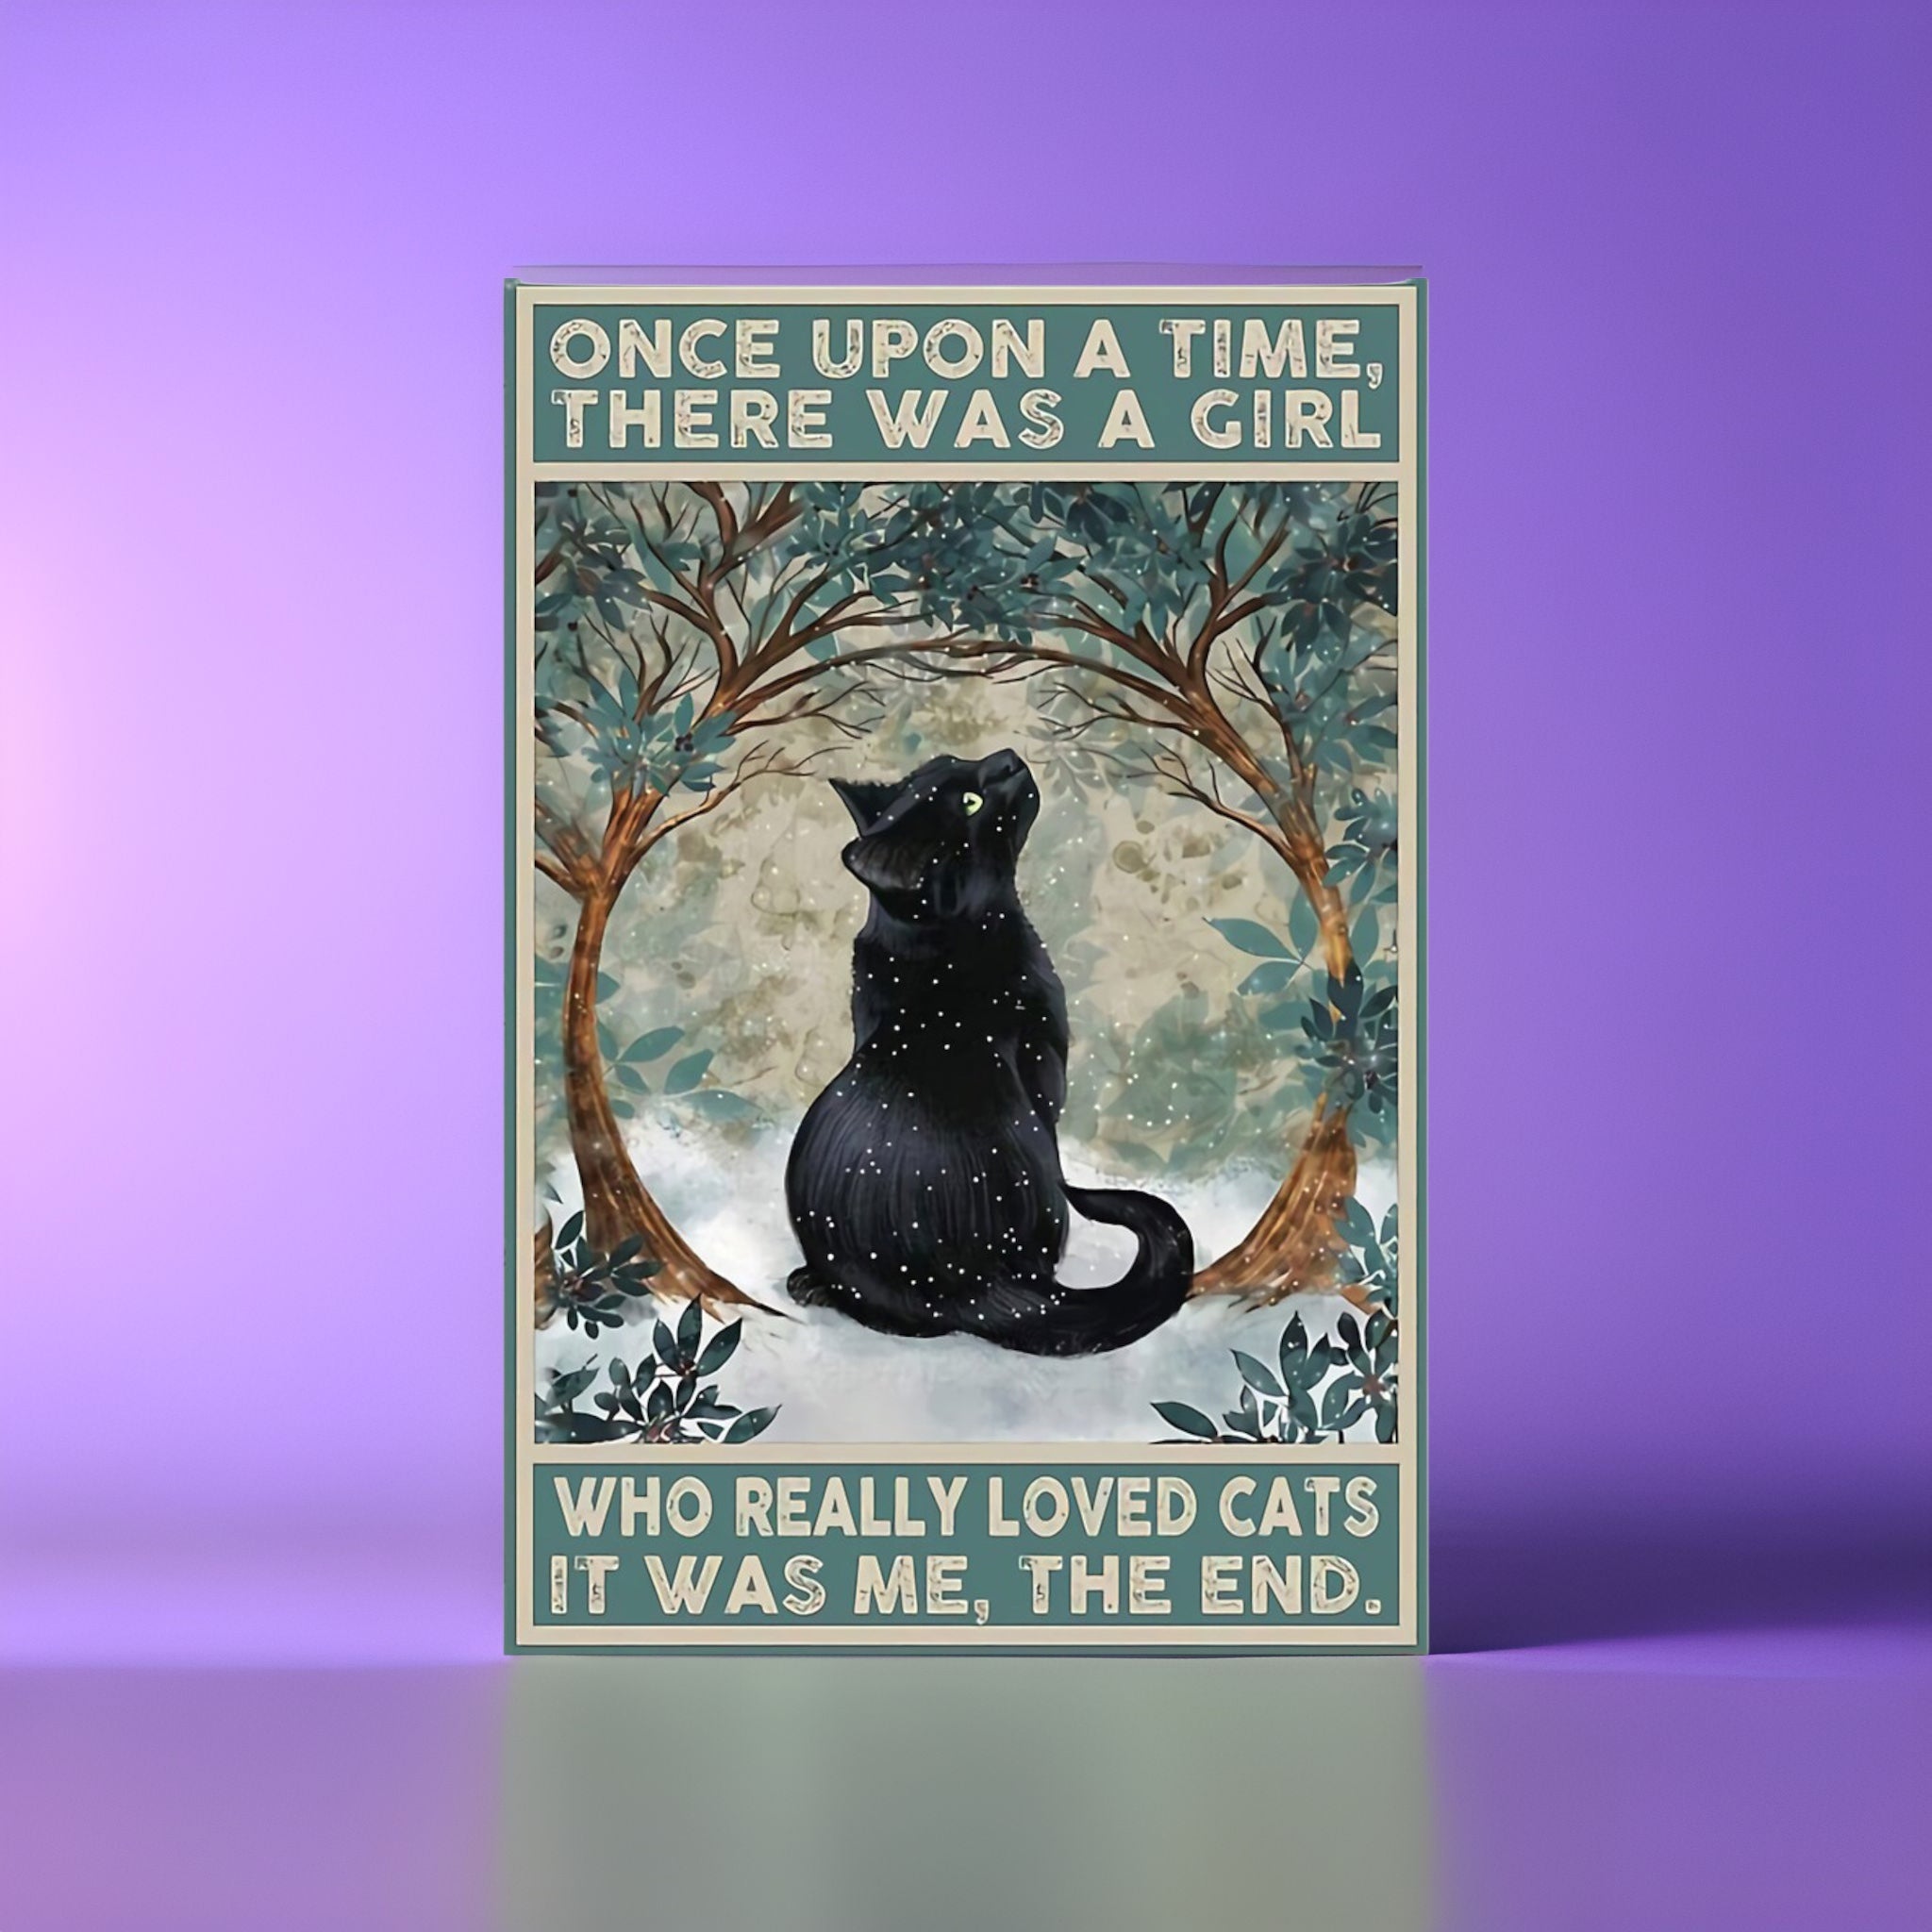 Vintage look Cat Themed Tin Wall Art - Time Spent with Books and Cats is never wasted